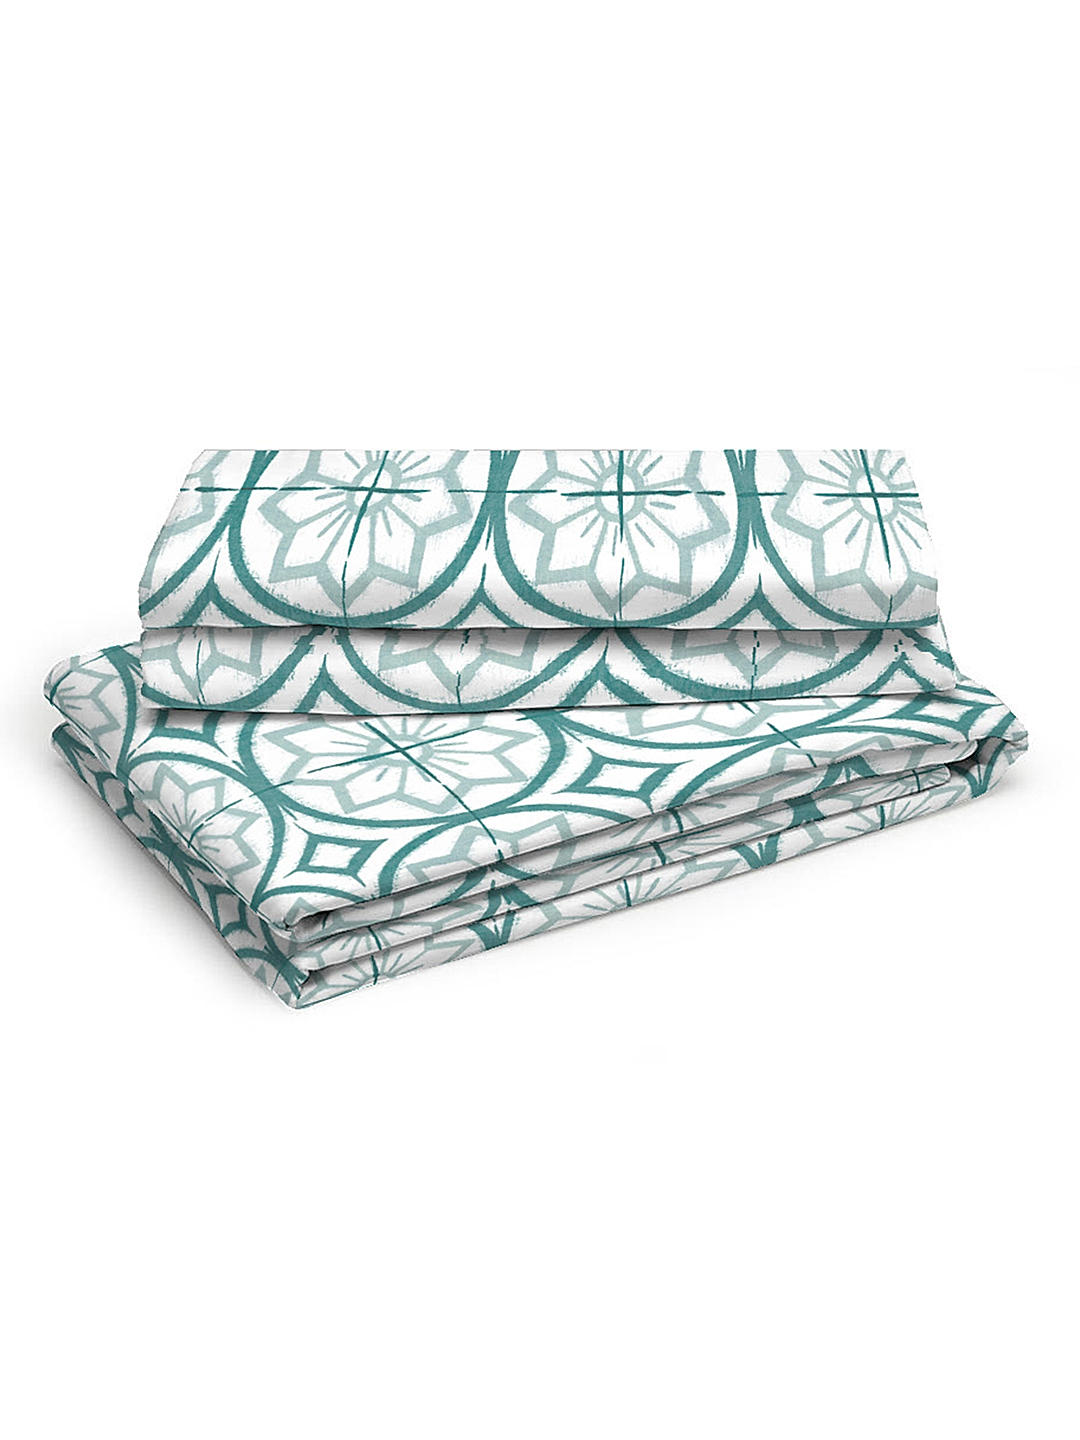 Signature Sateen 300 TC 100% cotton Ultra Fine Blue Colored Indian Print King Bed Sheet Set